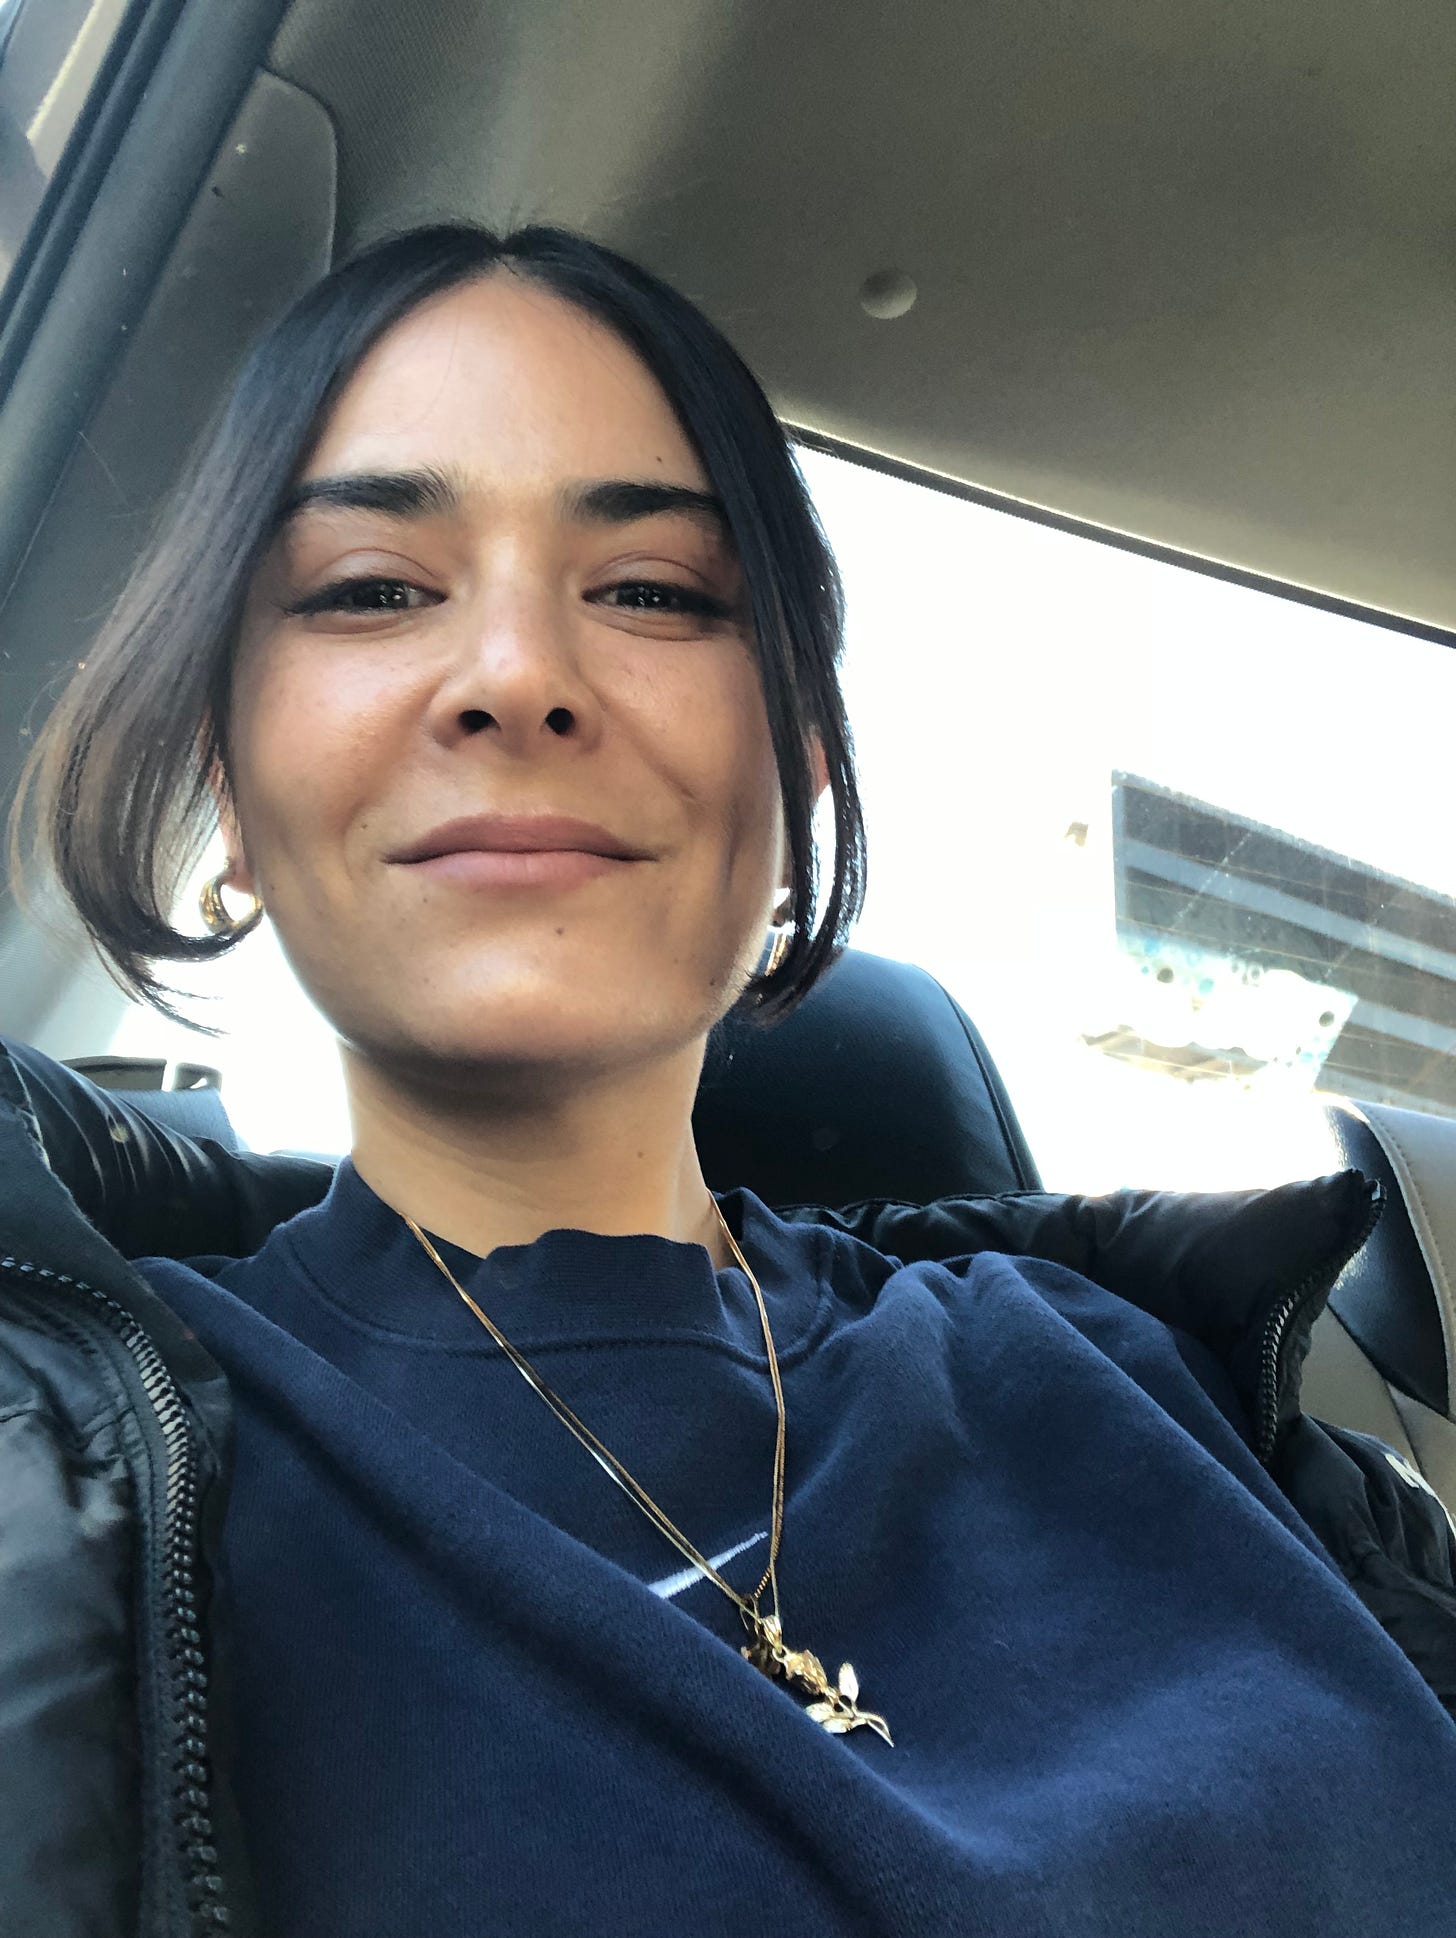 Naomi Zeichner selfie in the backseat of a car